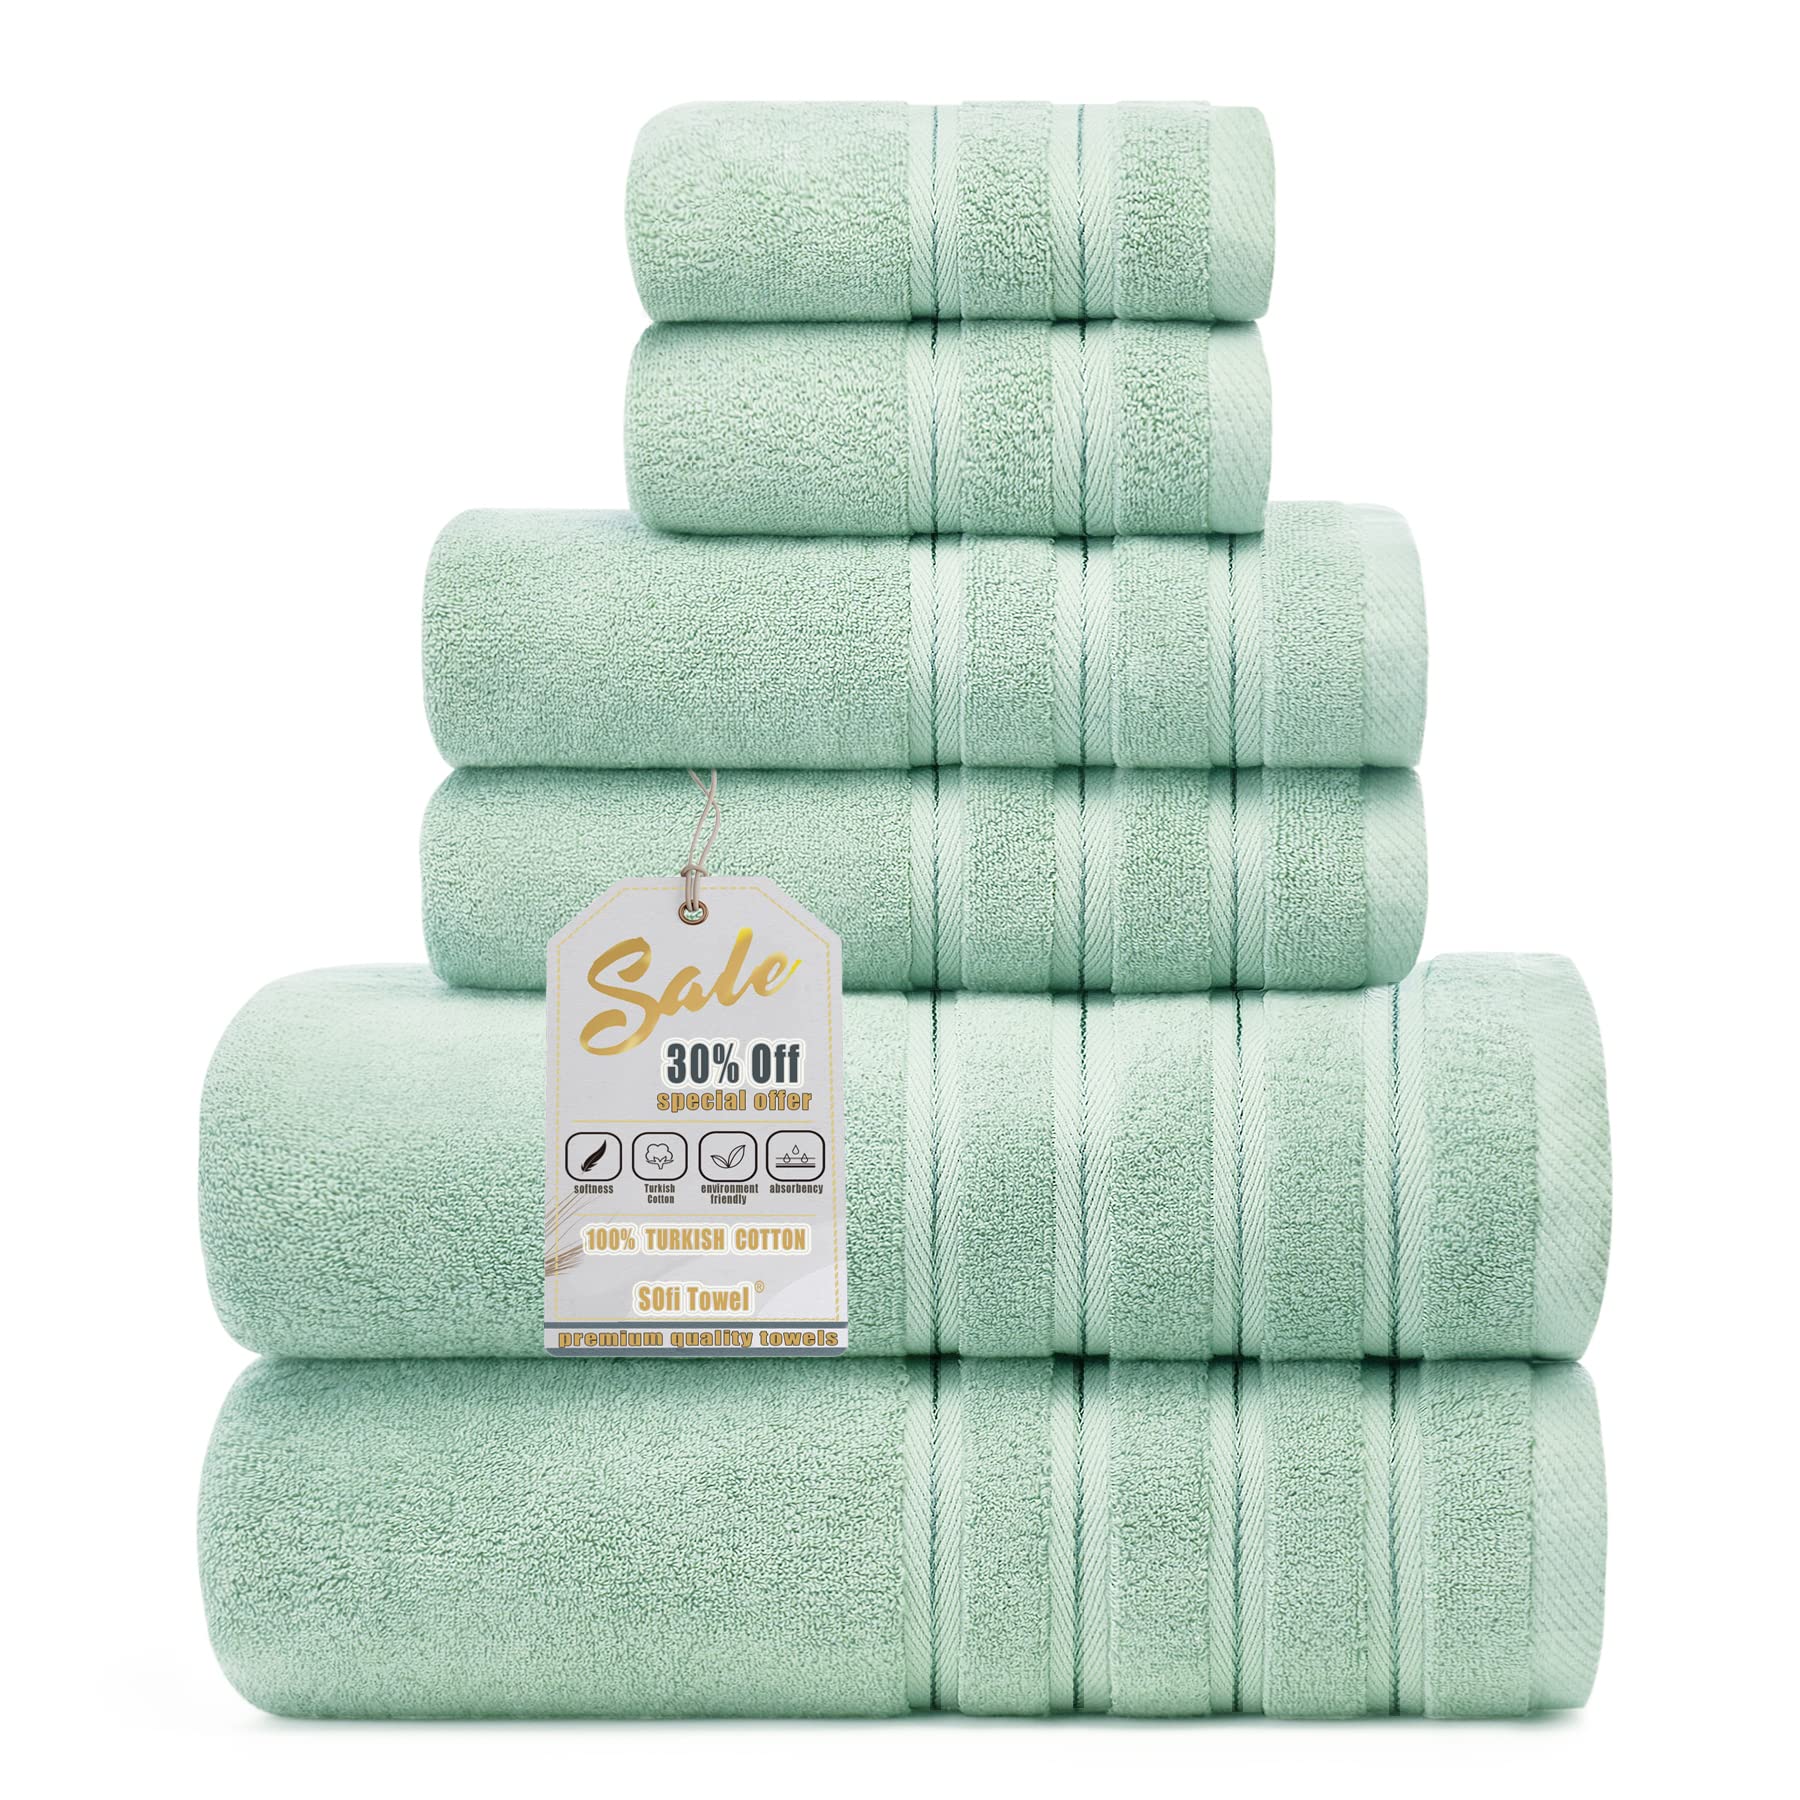  Luxury Turkish Towels Bathroom Sets Clearance 6 Piece Bath Towel  Set - 2 Bath Towels, 2 Hand Towels, 2 Washcloths, Super Soft Highly  Absorbent Grey : Home & Kitchen